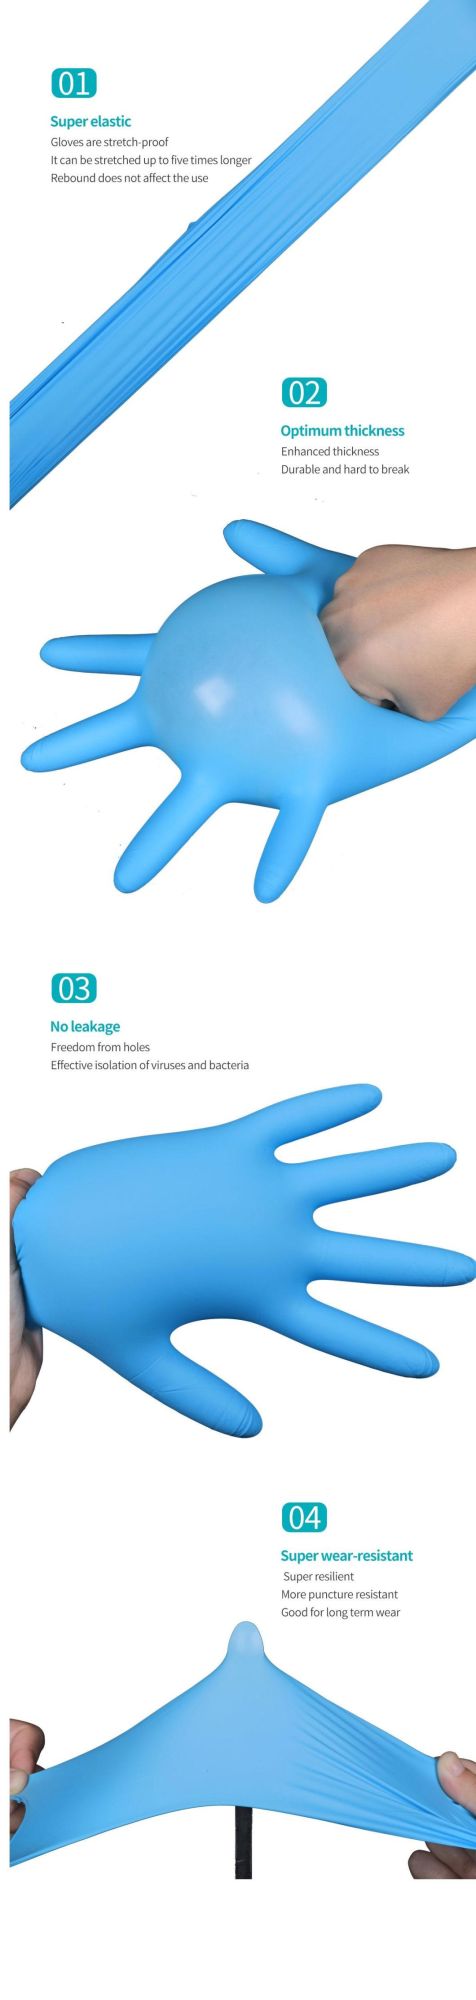 Disposable Blue Thicken Surgical Powder Free Nitrile Glove for Personal Protect